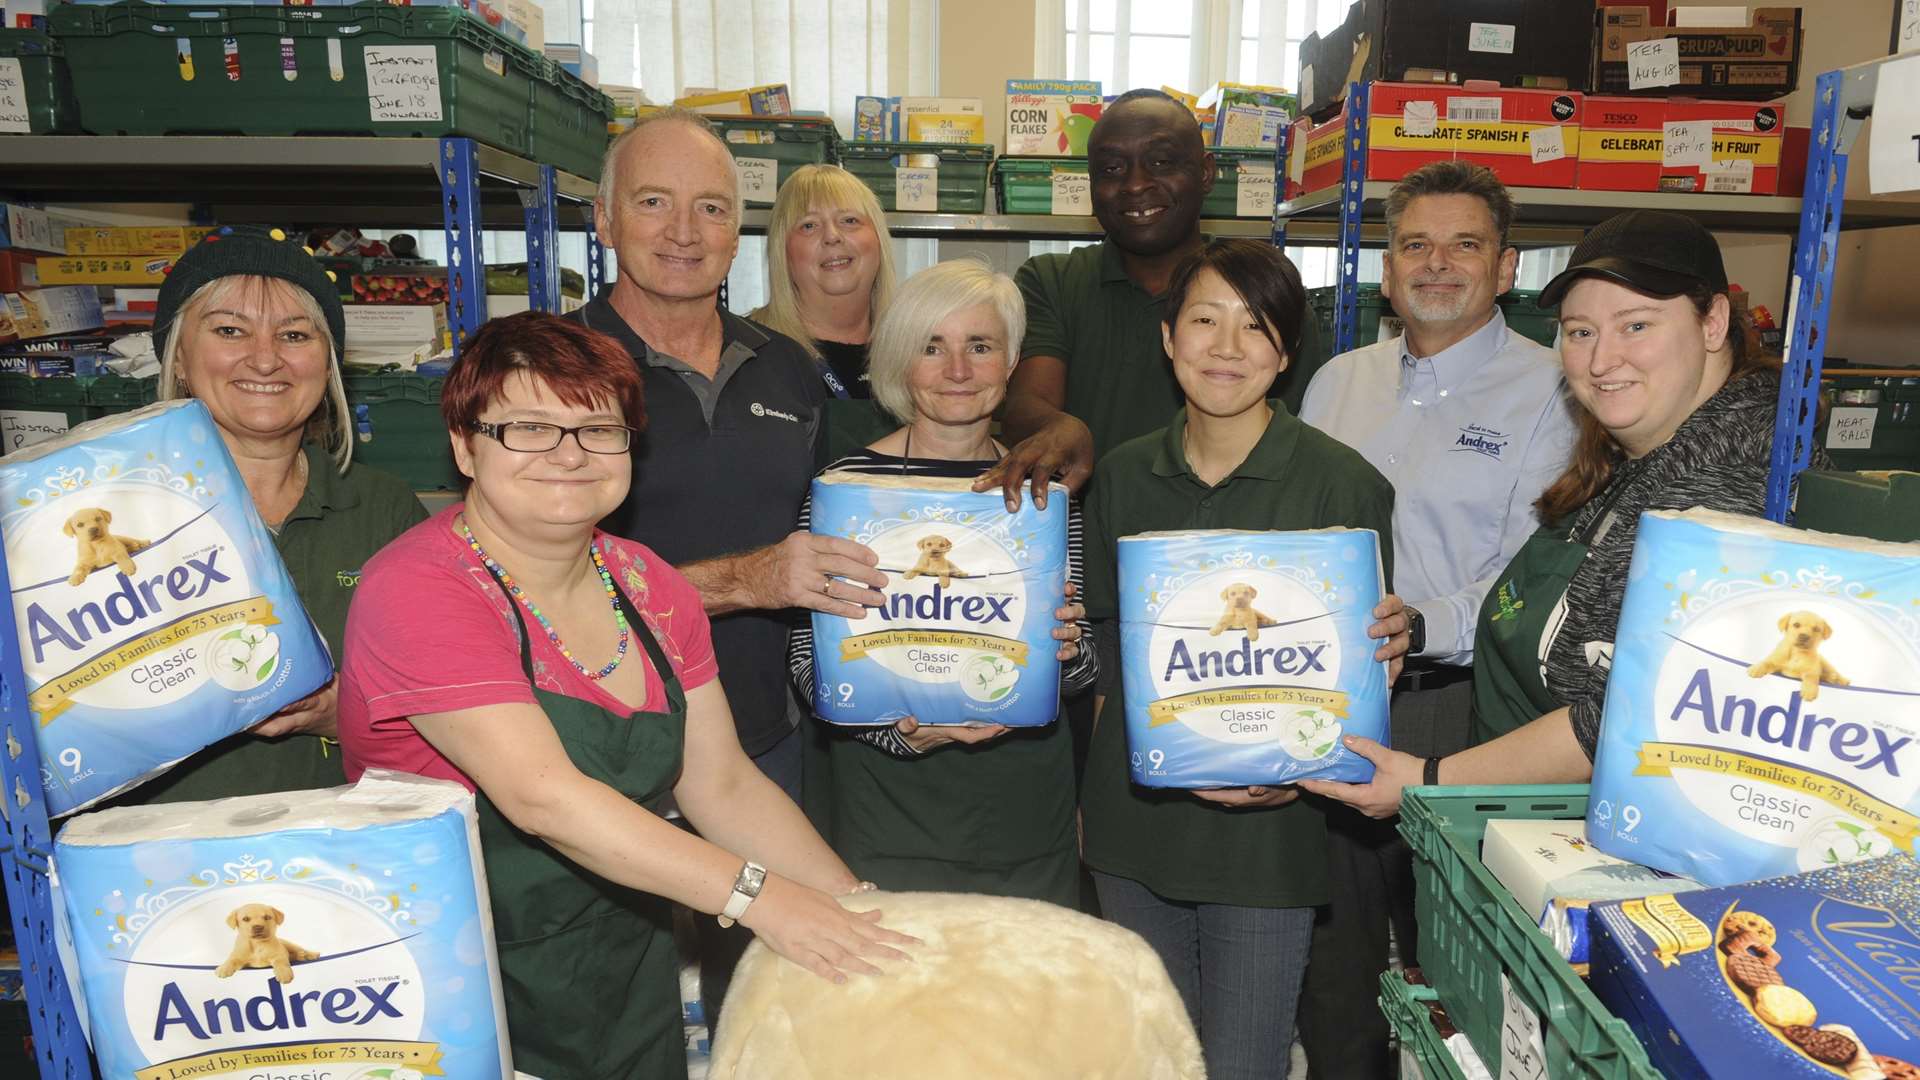 Staff from Kimberly Clark's depot in Northfleet donated toilet paper to a foodbank last year